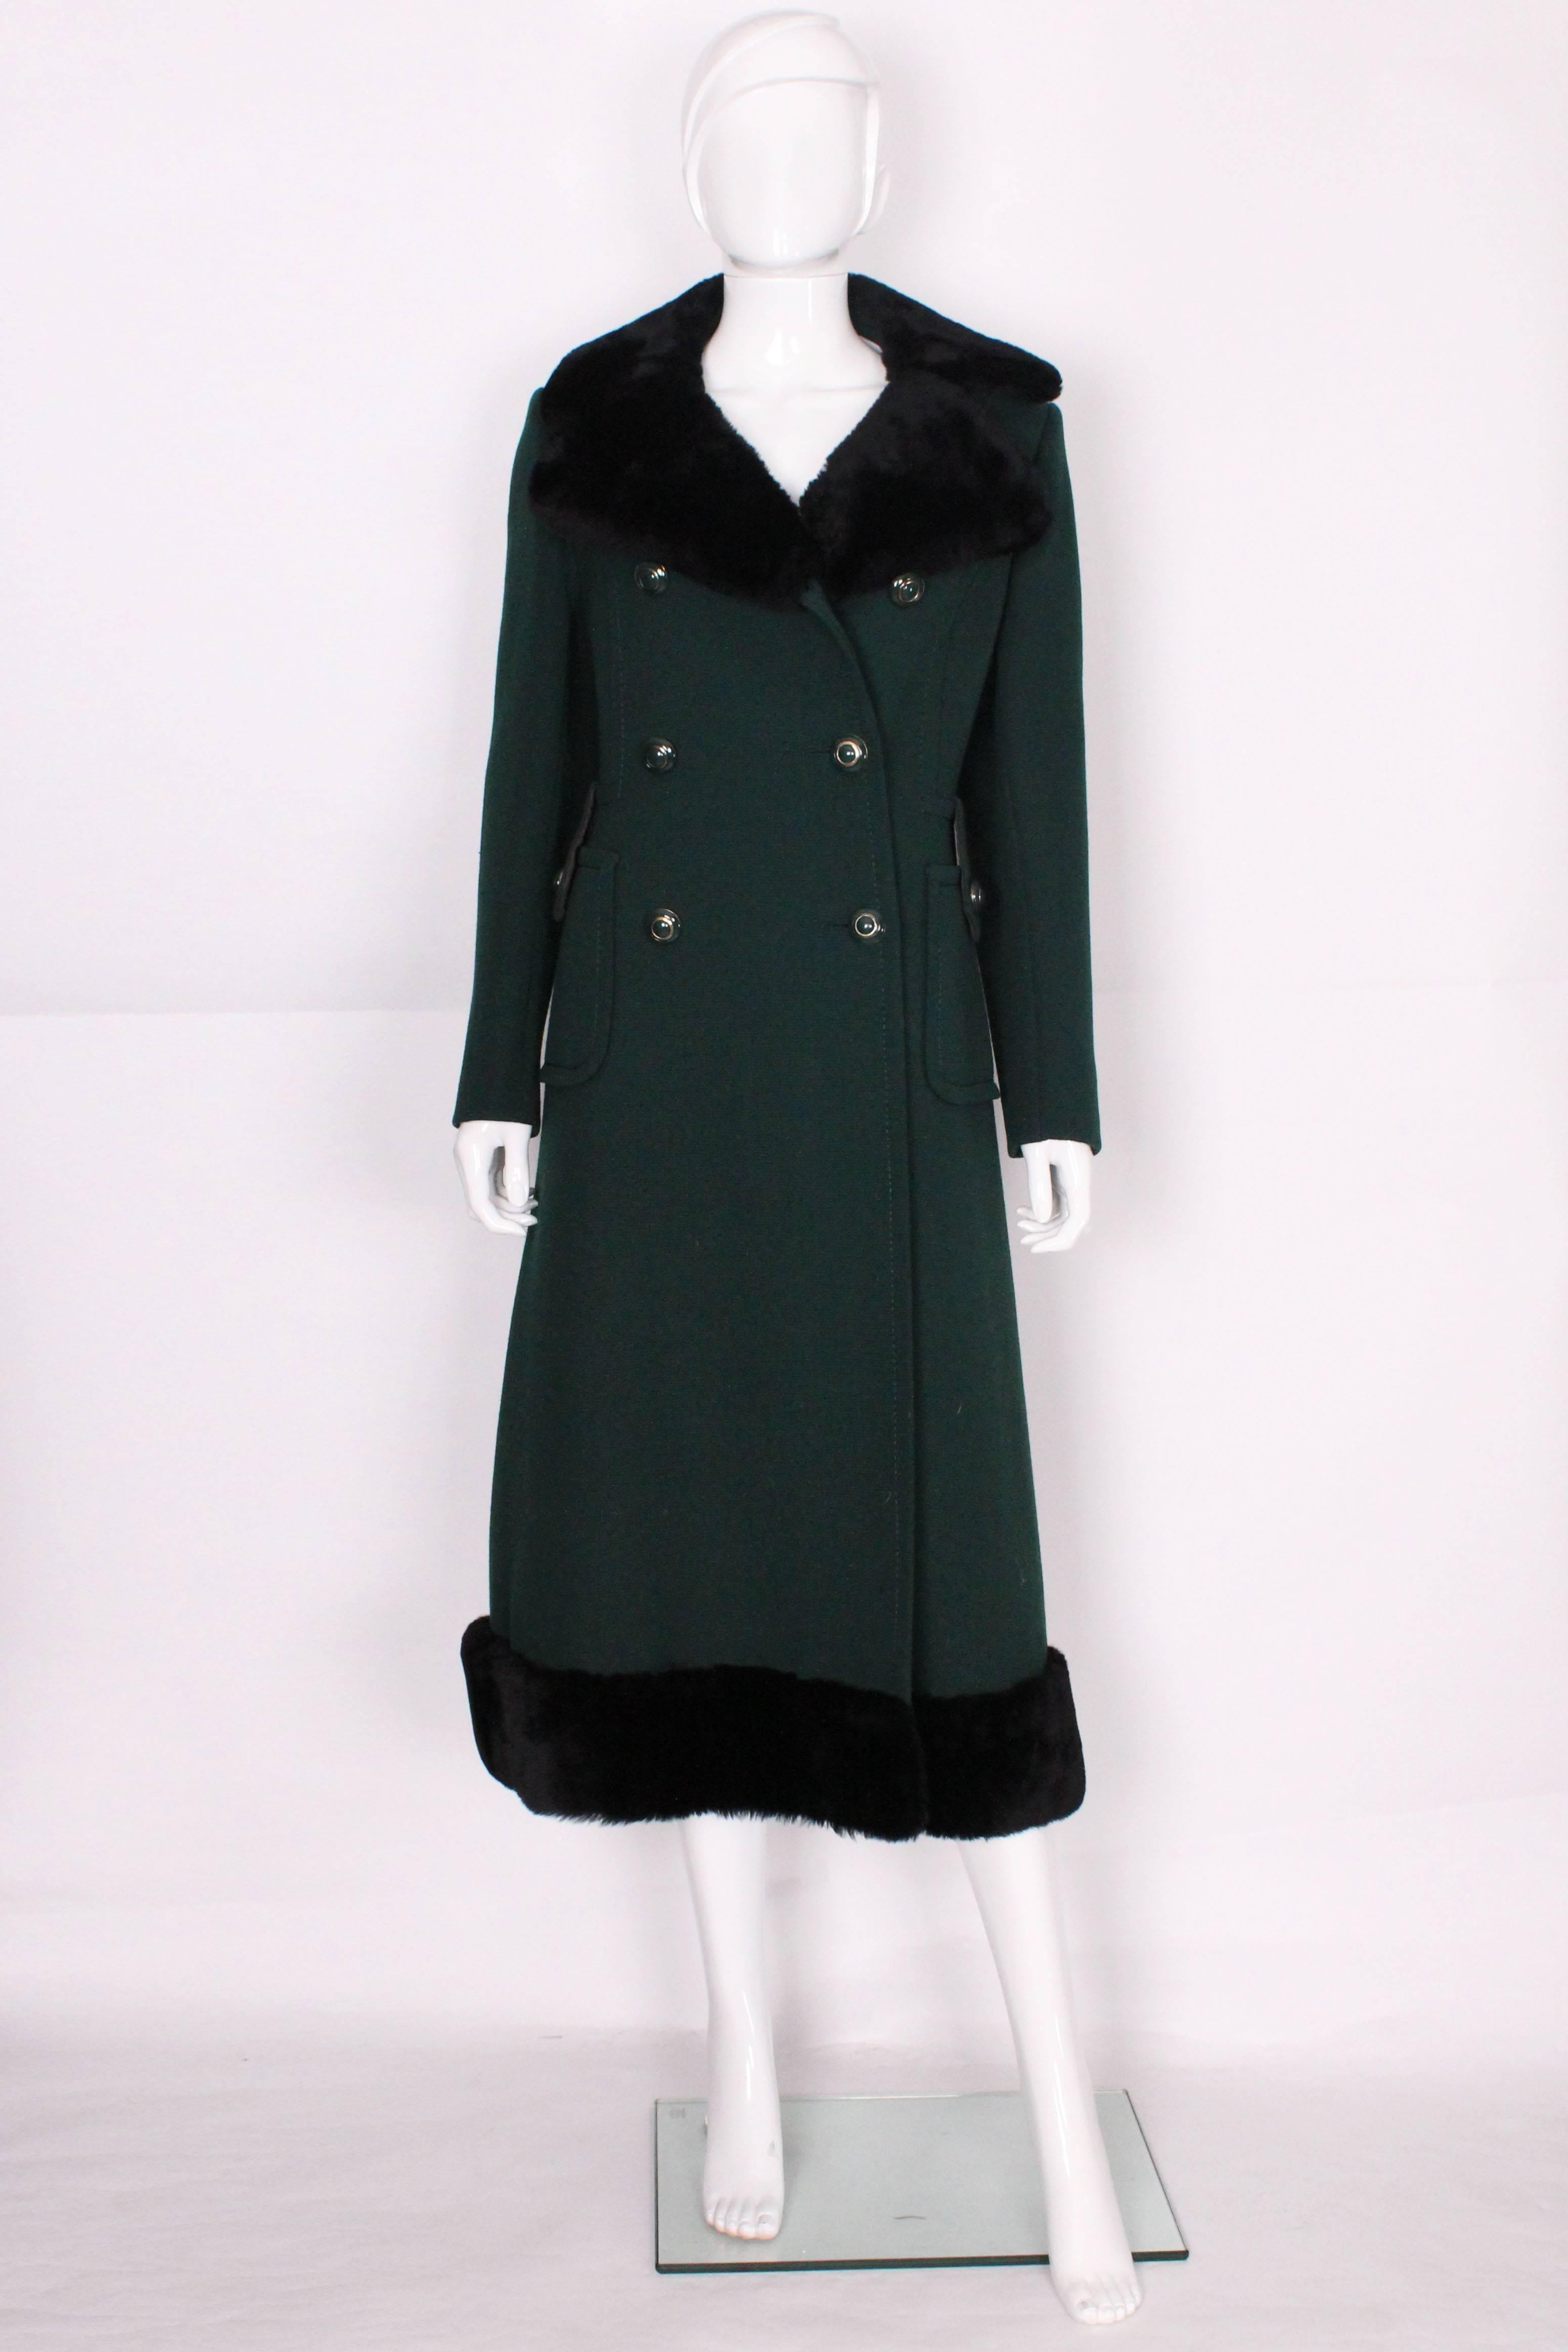 This chic coat is made of really high quality dark pine green wool. There is a black faux fur collar and trim at the hem. It is double breasted with 3 rows of green and gold buttons on either side. There are also 2 mtching buttons on the large patch